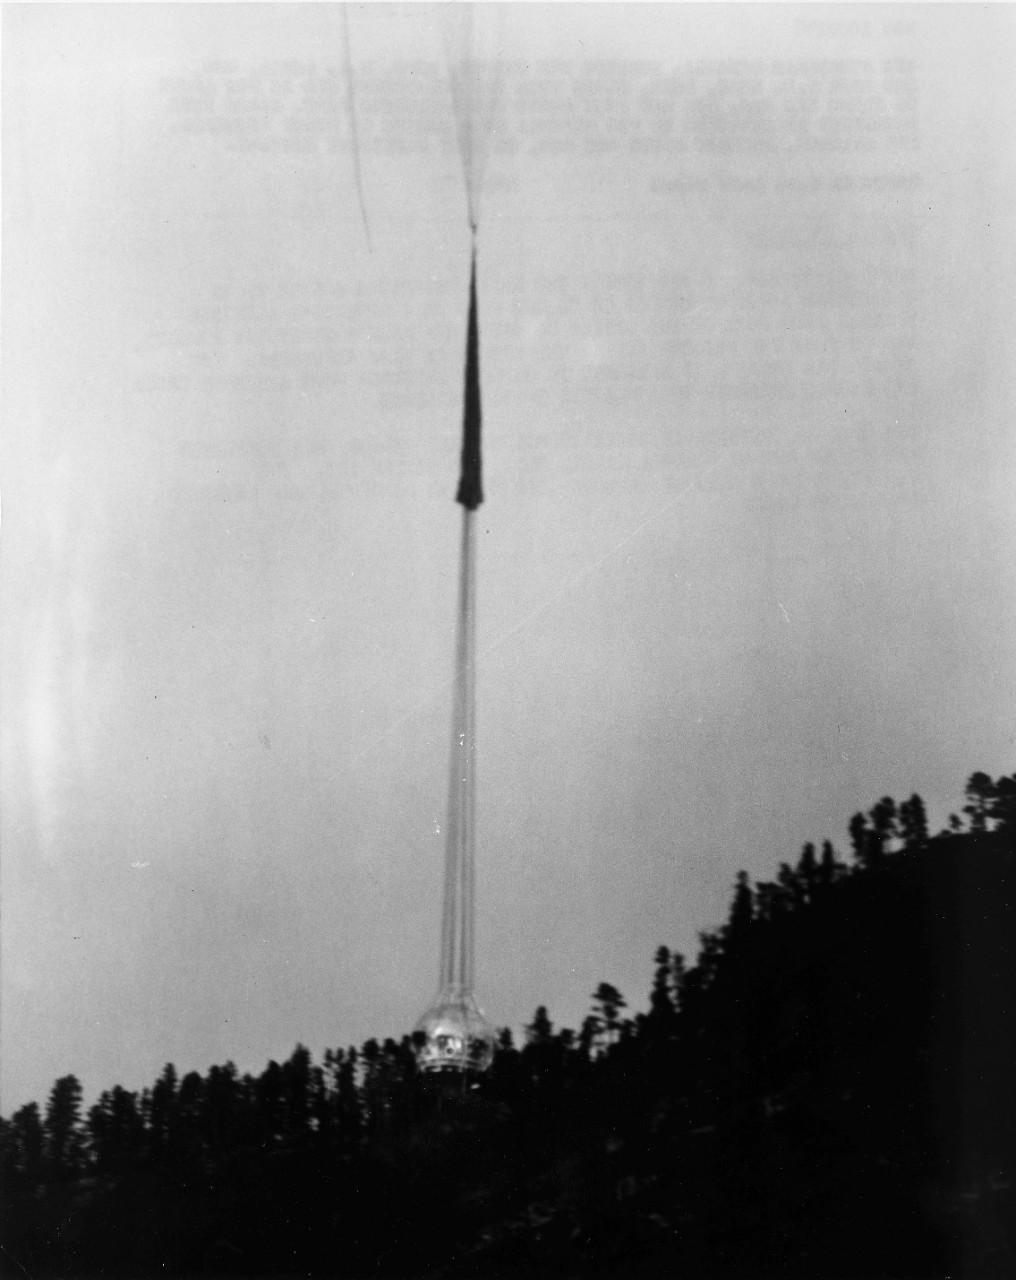 The Strato-Lab gondola rises from the Stratobowl and is now about to clear the rim, some 400 feet above the launch site (Image: Naval History and Heritage Command)